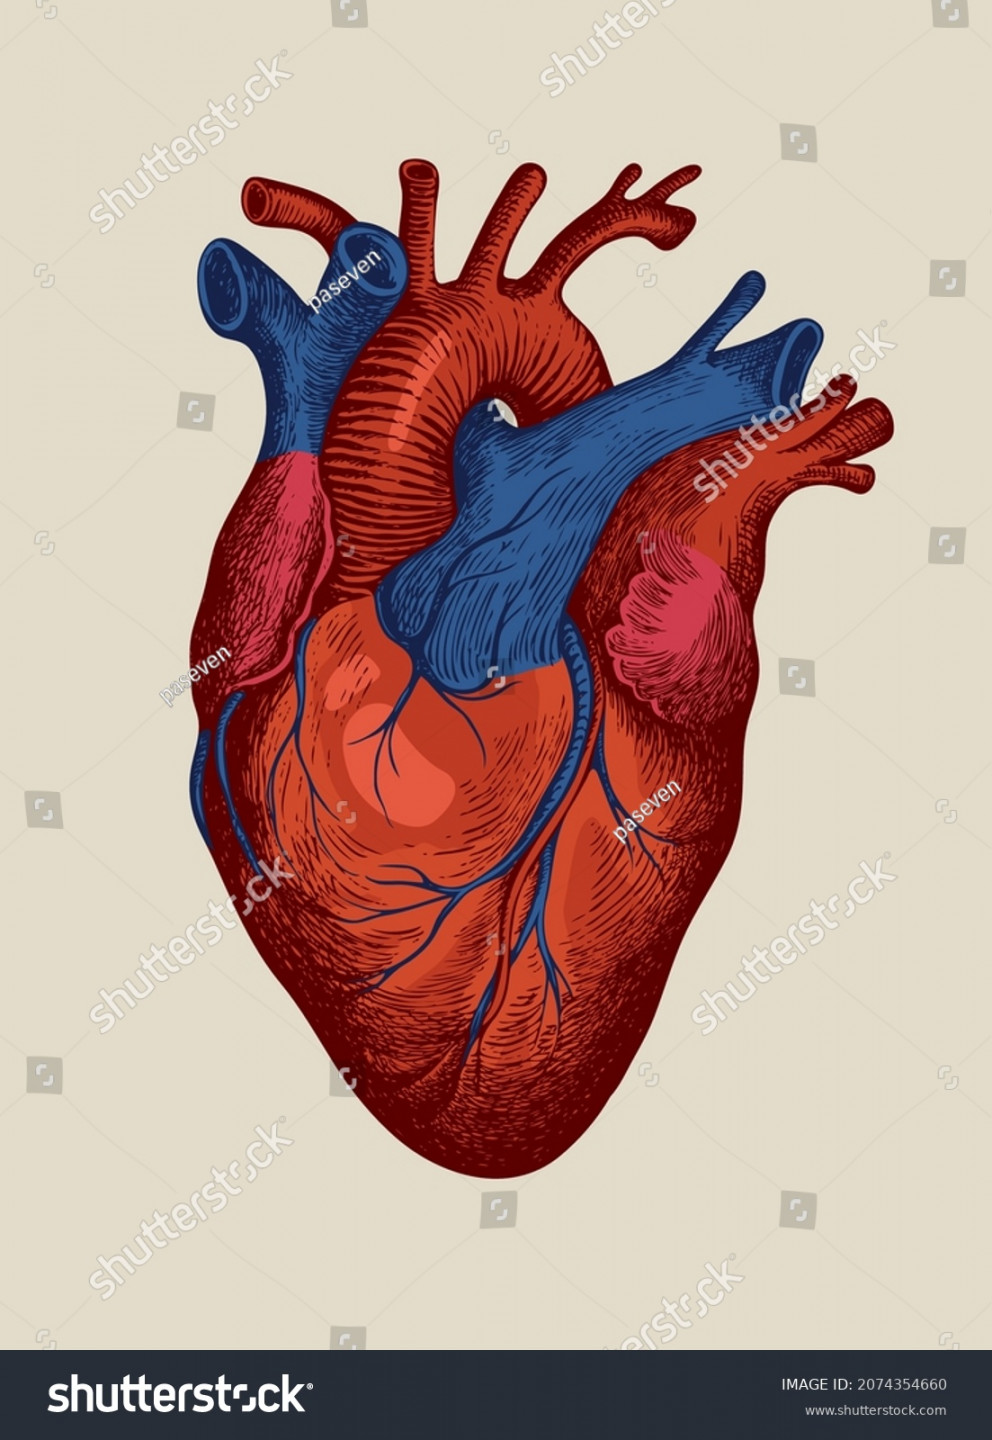 Handdrawn Human Heart Red Blue Detailed Stock Vector (Royalty Free